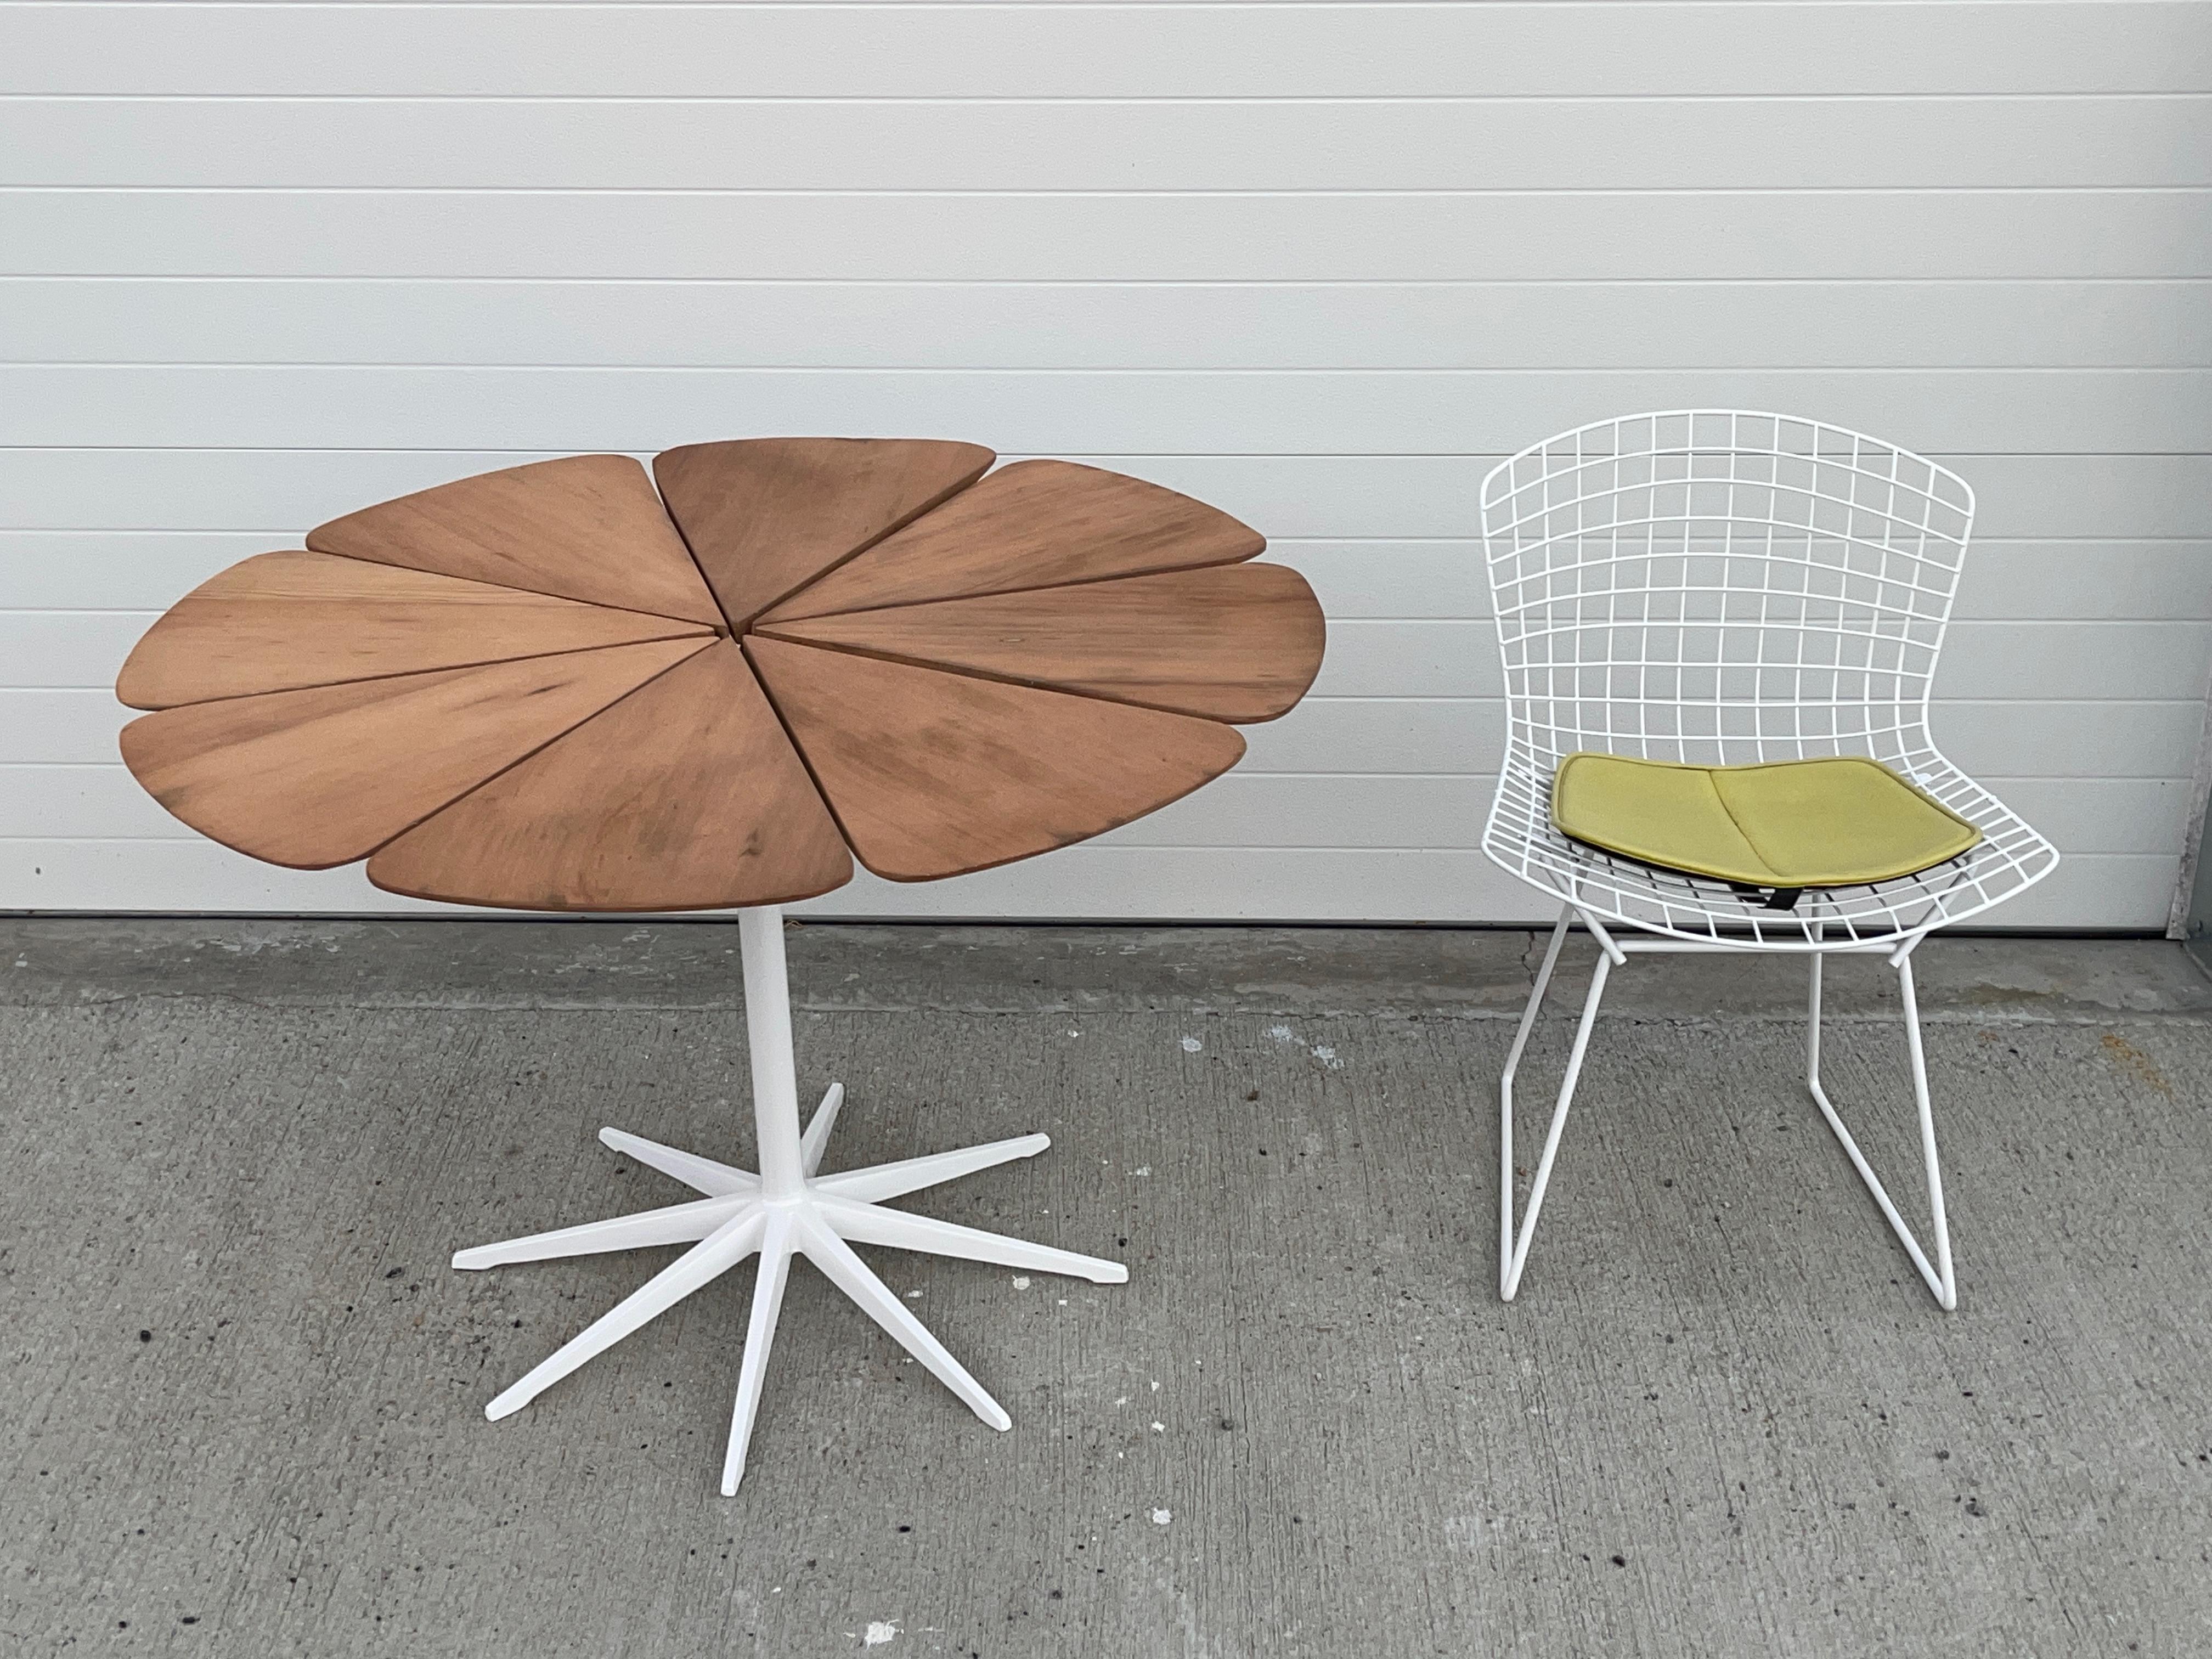 Set of six newly restored wite Bertoia wire chairs model 420-2 produced by Knoll circa 1961 including original yellow Knoll seat cushions.
These chairs have been freshly powder coated in gloss white and are suitable for outdoor use and well as